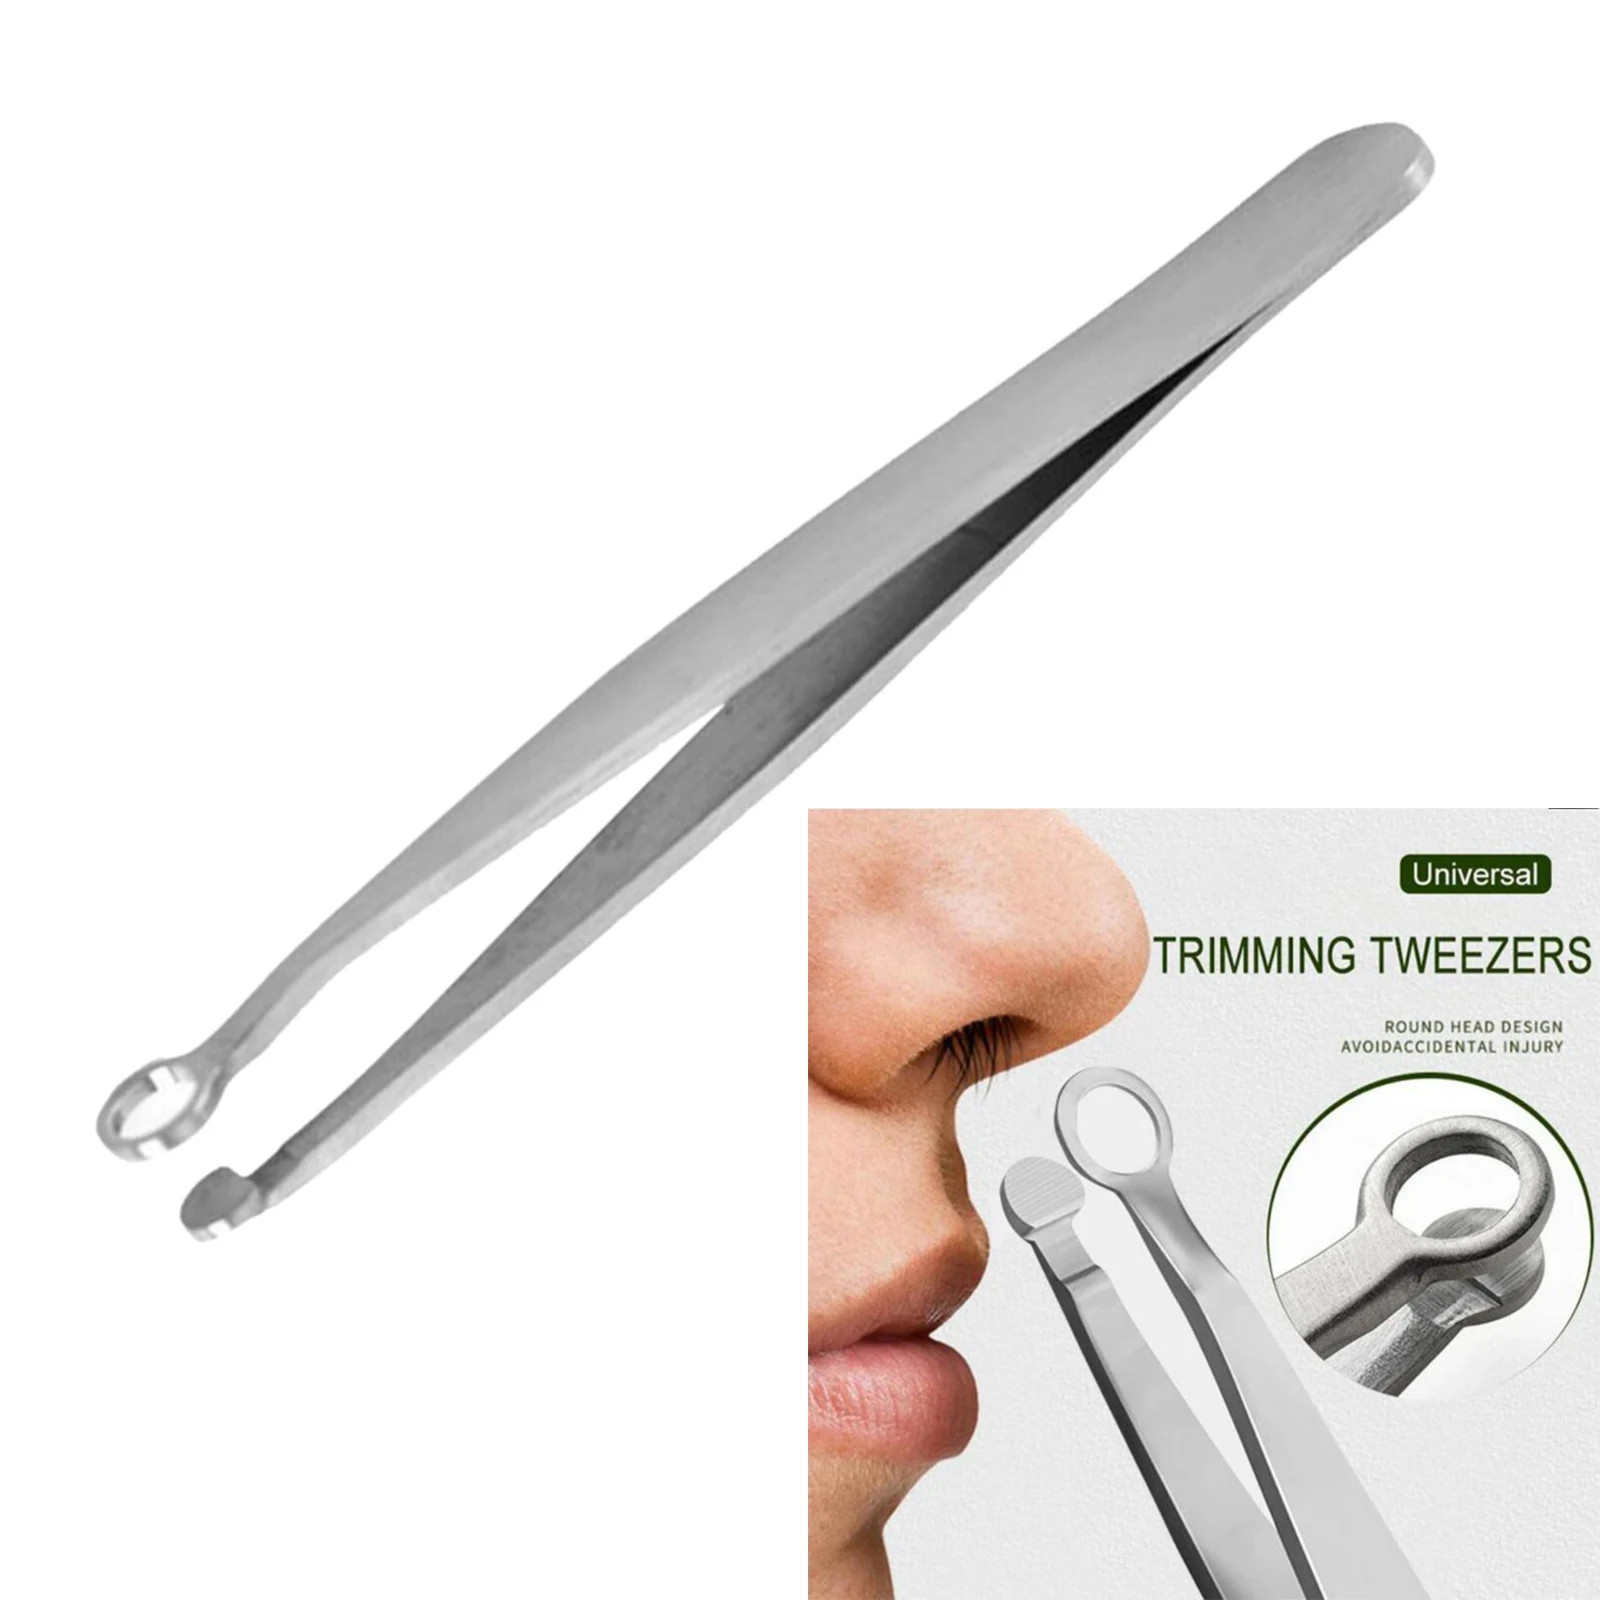 Universal Nose Hair Trimming Tweezers Safe Face Hair Shaving Trimmer Round Tip Design Eyebrow Grooming Nose Hair Removal Trimmer